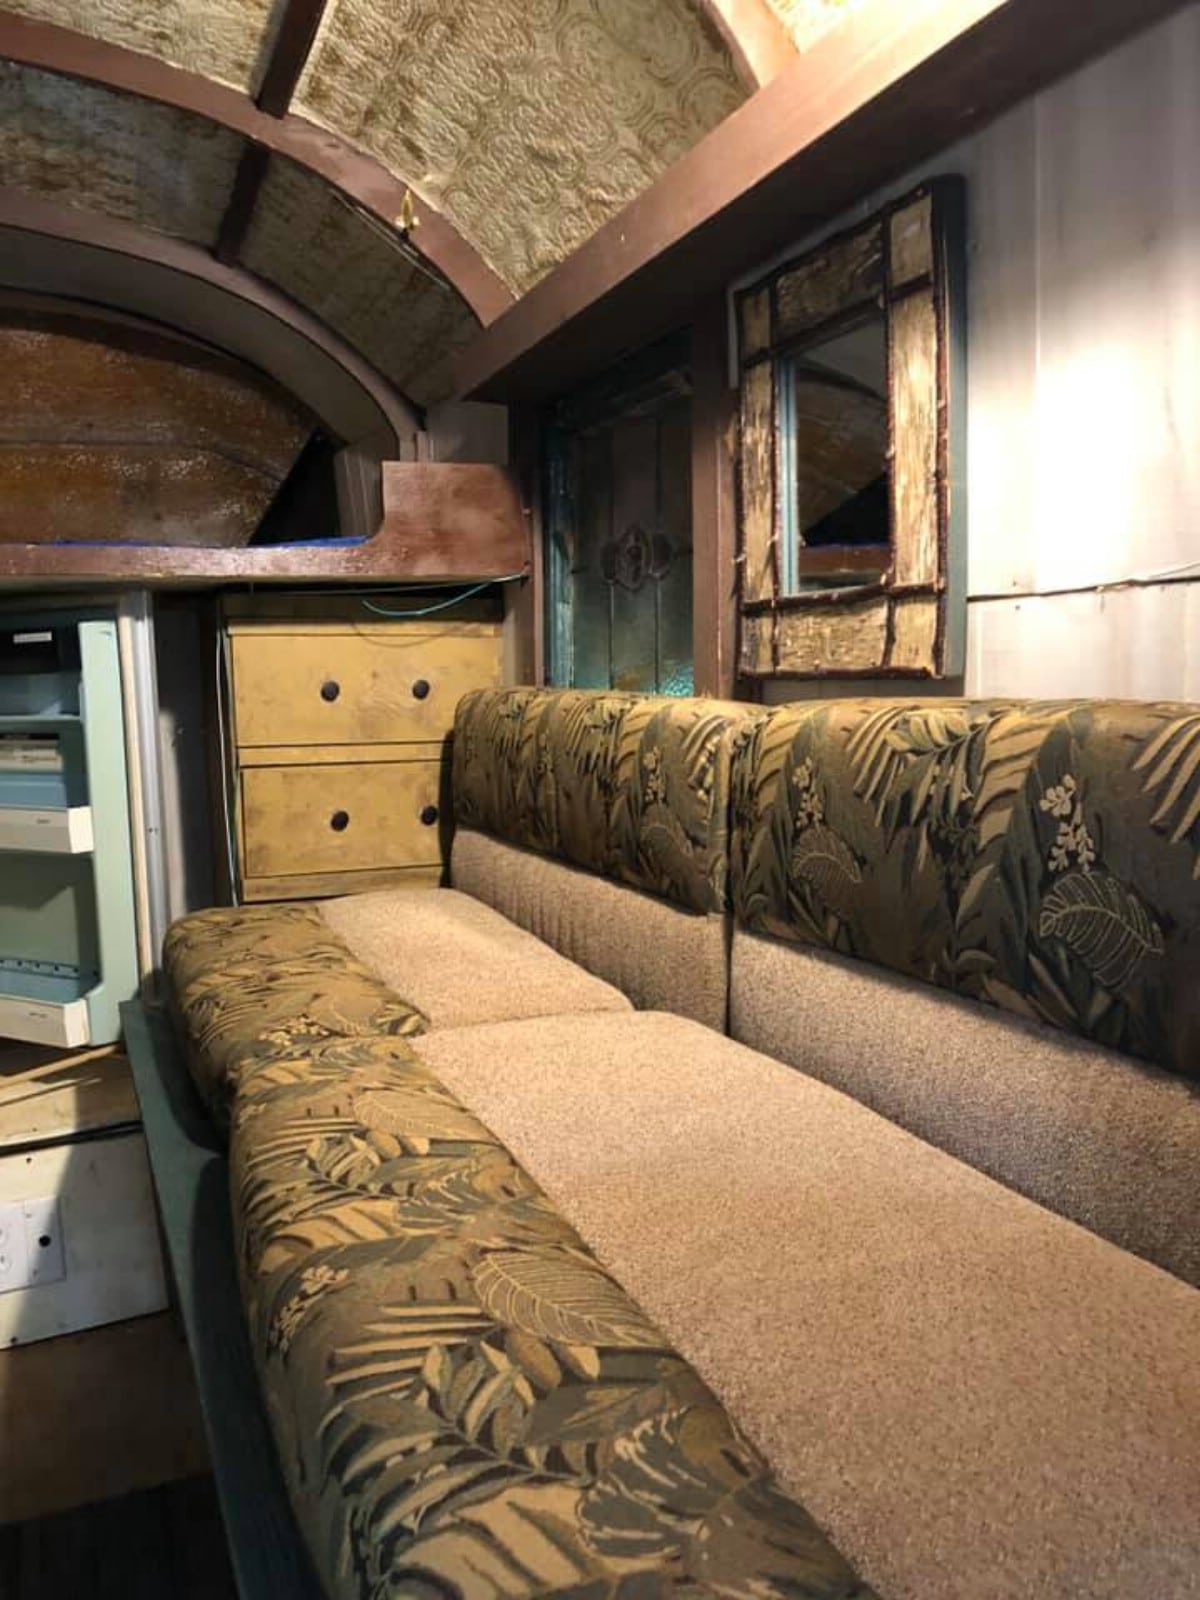 Couch in camper with mirror